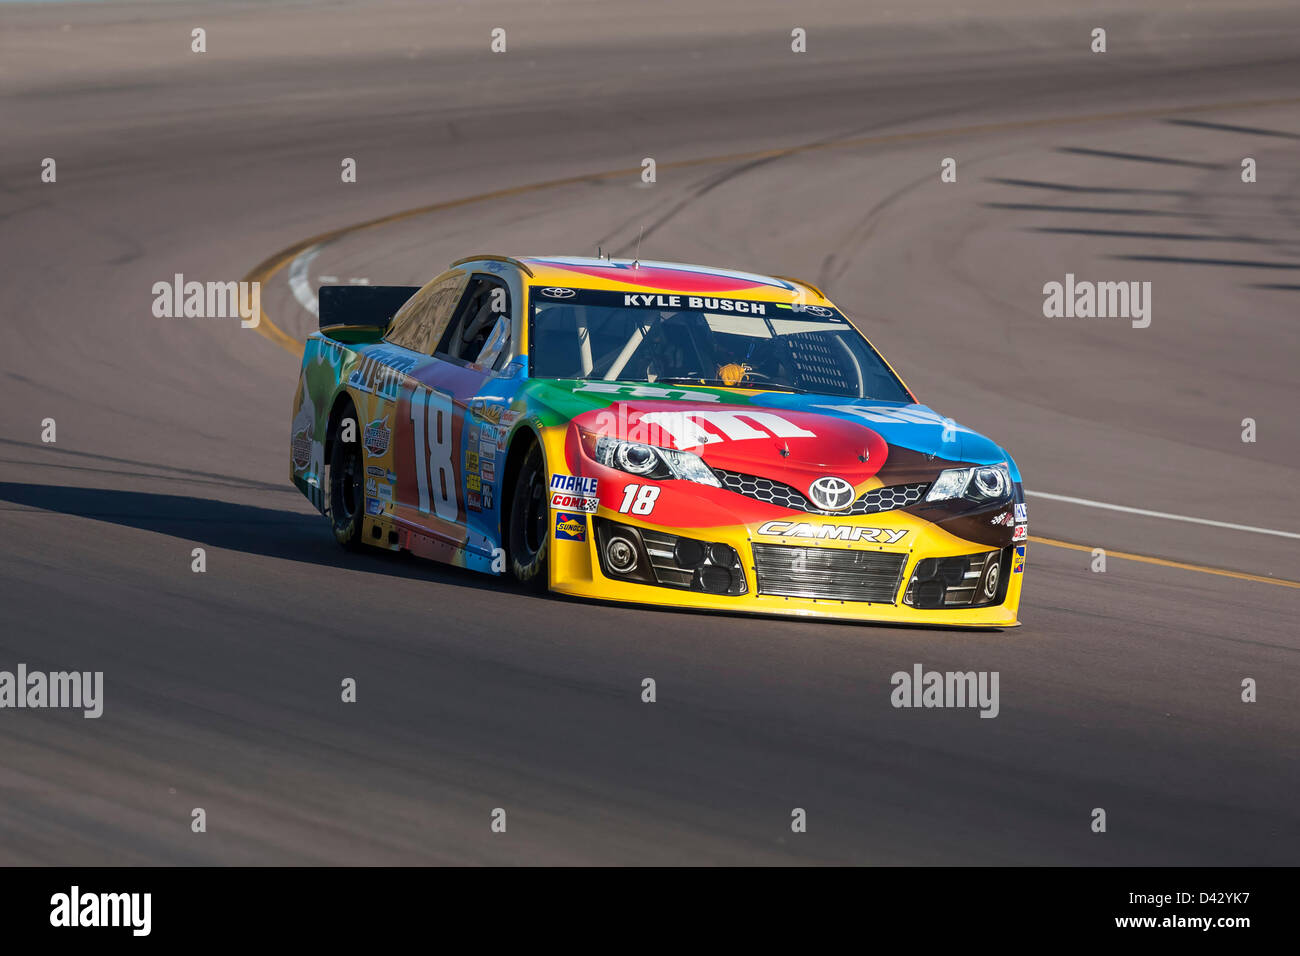 March 1, 2013 - Avondale, AZ, U.S. - AVONDALE, AZ - MAR 01, 2013: Kyle Busch (18) takes his car on the track and qualifies 4th for the Subway Fresh Fit 500 race at the Phoenix International Raceway in AVONDALE, AZ. Stock Photo